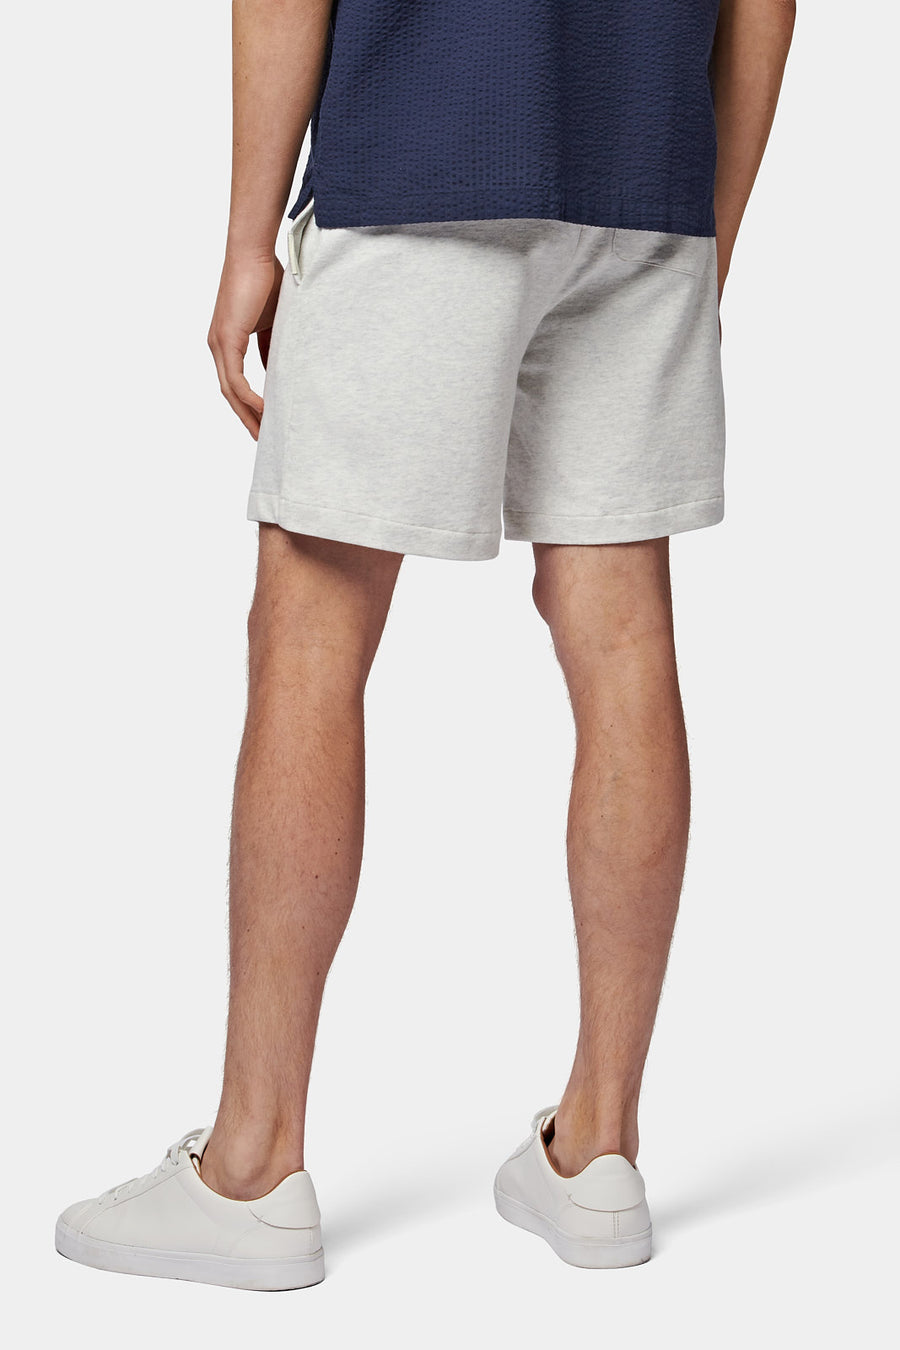 Essential French Terry Short in Grey Marl